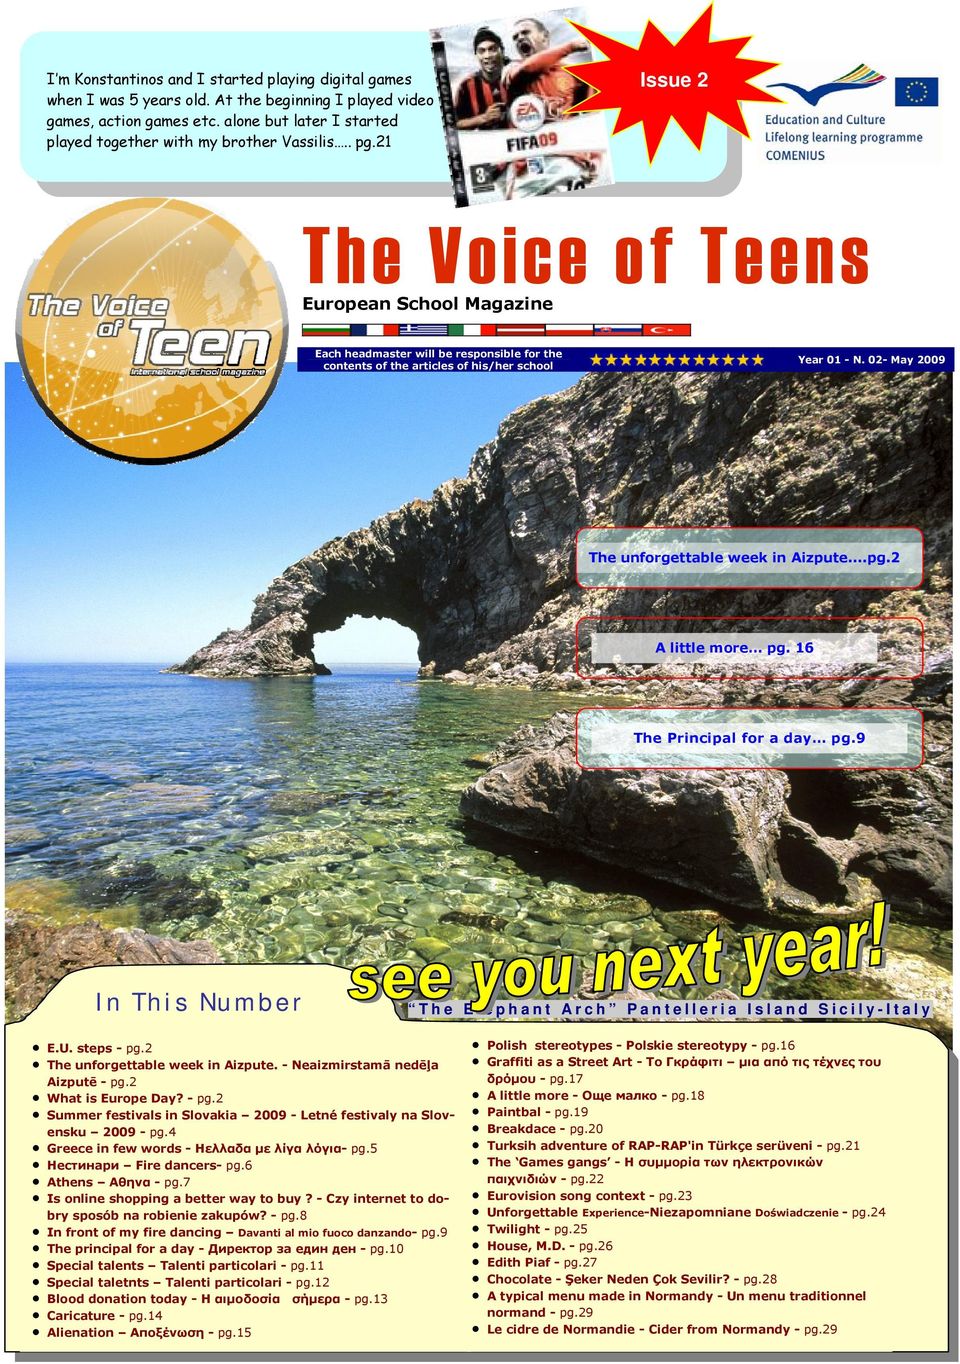 21 Issue 2 The Voice of Teens European School Magazine Each headmaster will be responsible for the contents of the articles of his/her school Year 01 - N.